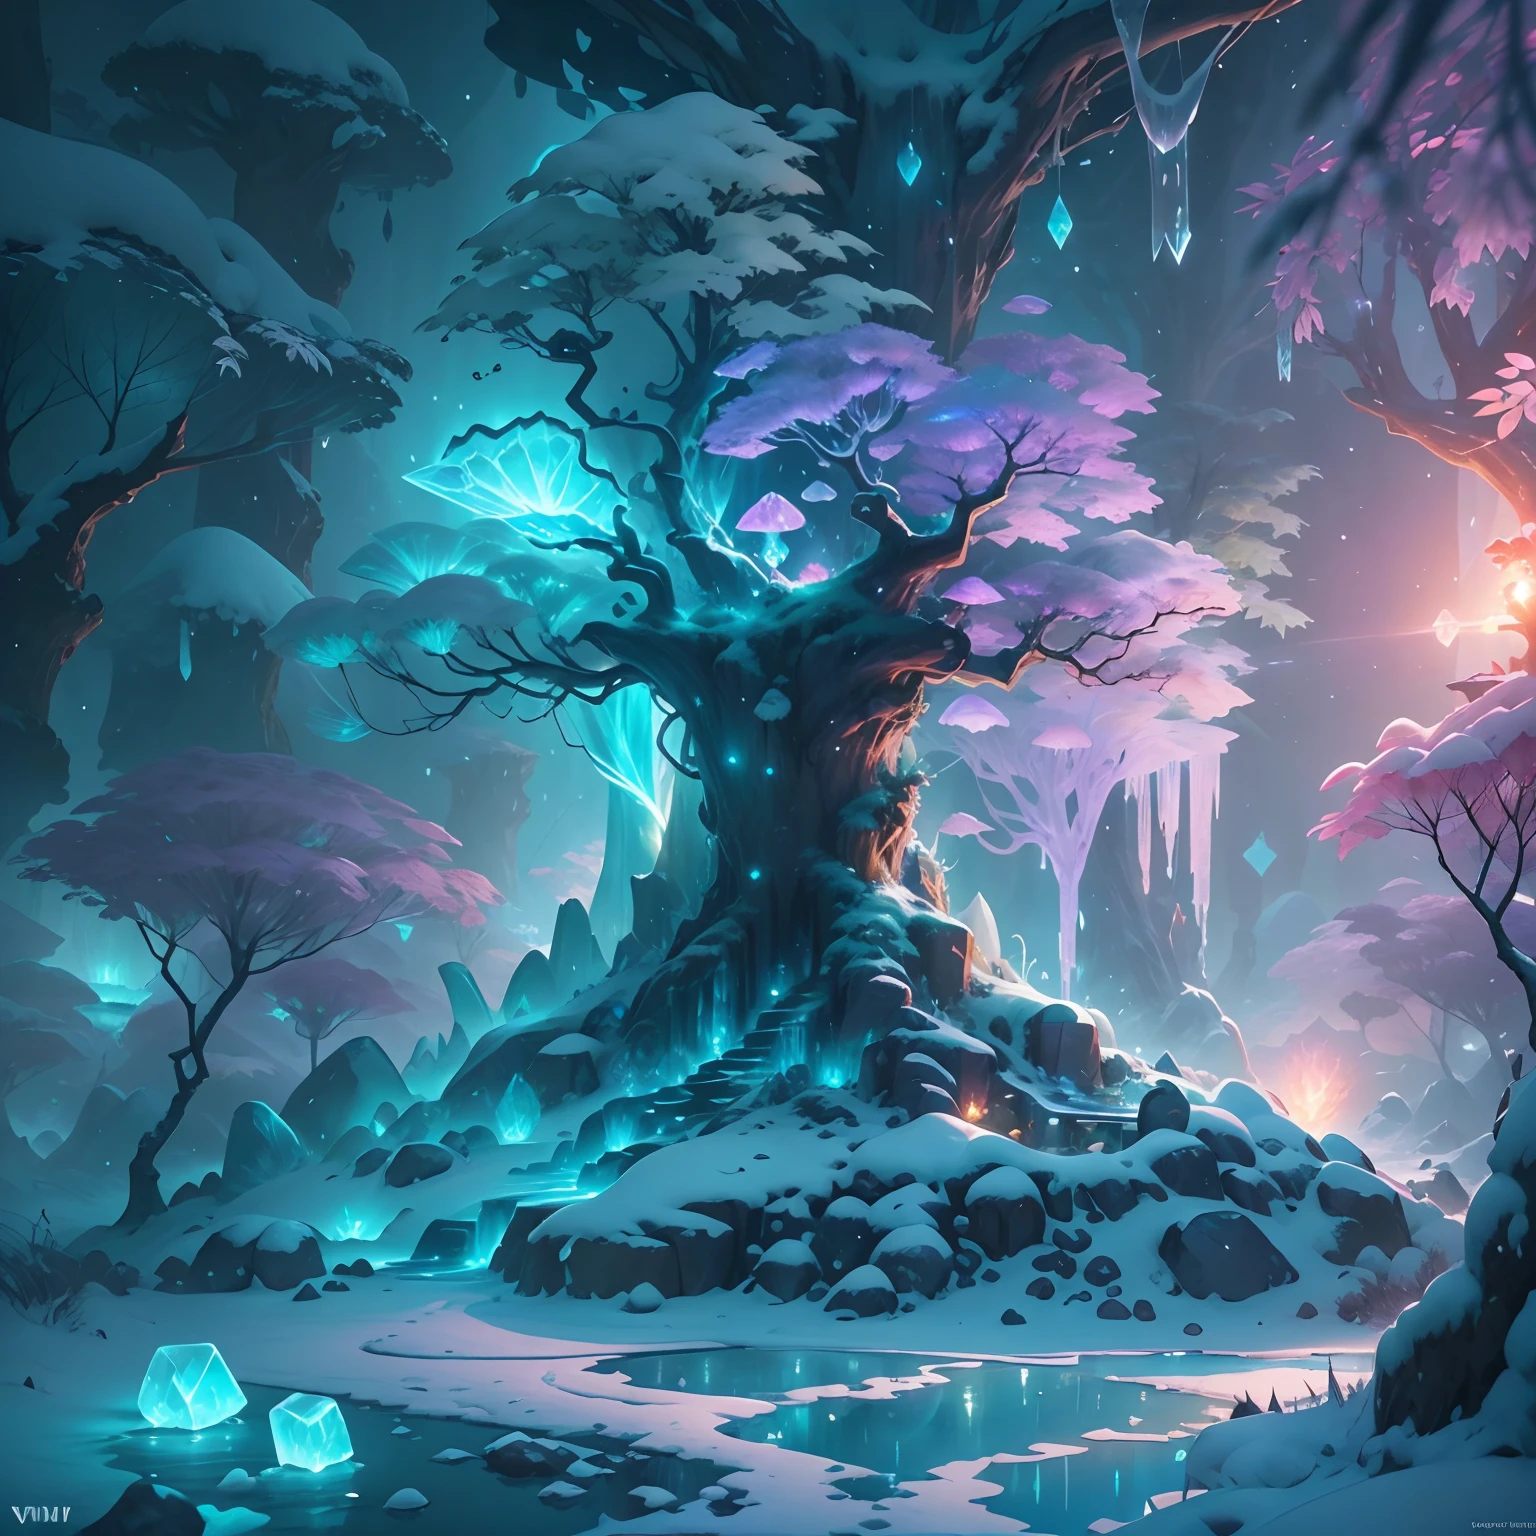 Fantastic snow and ice jungle，Many scattered crystal trees，Beautiful transparent flowers,Shine in the center，fanciful，Starskrim，cleanness，glimmering、Shineagnifica、Verdant、Light、with light glowing，Magic pictures, dramatic  lighting, Foto realism, The ultra-detailliert, 4K, depth of fields, A high resolution，Glowing crystals illuminate the snow and ice，Natural elements in the forest theme，Colorful snow and ice jungle，Epic fantasy art style，Delicate leaves and branches are surrounded by fireflies（nature elements），（Jungle theme），（Foliage），（tree branch），（glowworm），（Particle effect）and other 3D， Octane rendering，Ray traching，Super meticulous，Depicting the harmony between man and nature, Epic fantasy art style, Epic fantasy art style HD, Epic fantasy digital art style, by Yang J, trending on artstation pixiv, Anime fantasy illustration, Beautiful ancient frost, Arte conceitual de inverno,